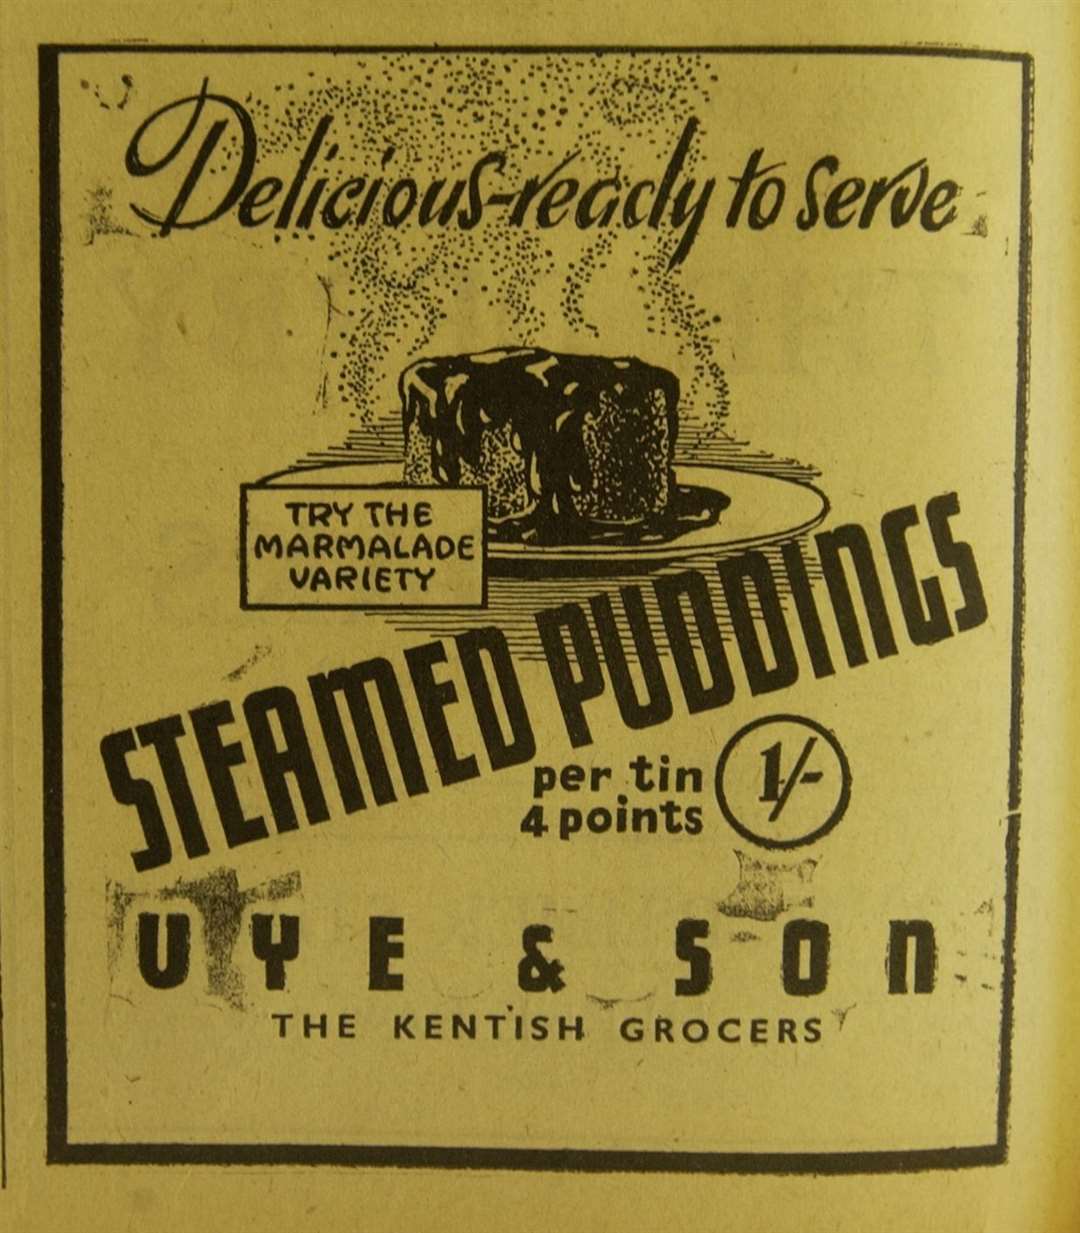 An ad for Vye and Son's owned brand steamed puddings - from 1946